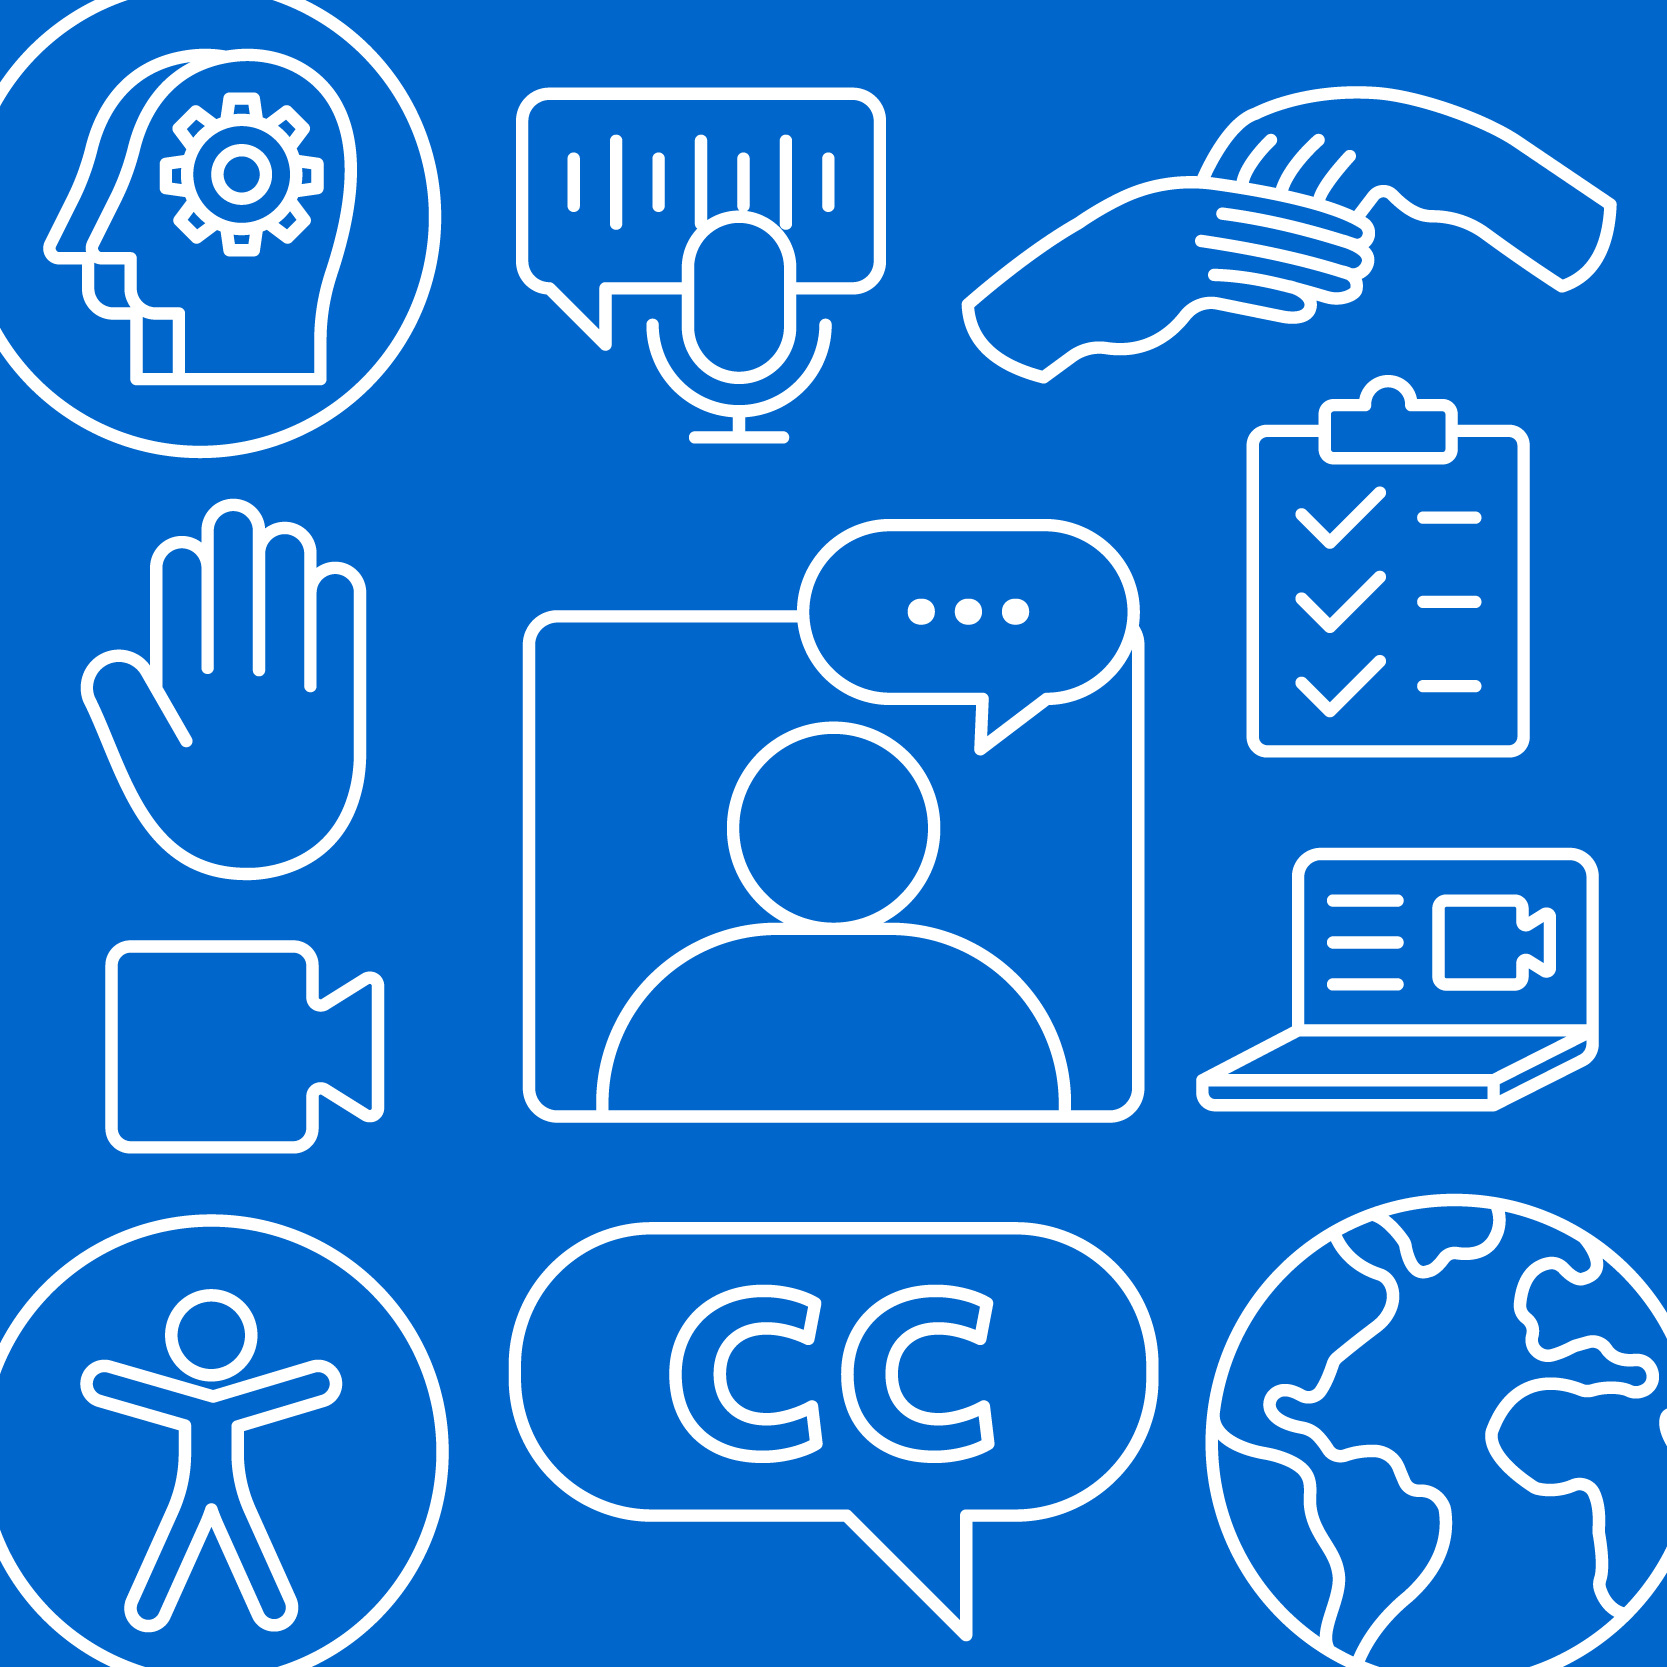 Various accessibility icons in white outline against blue background.